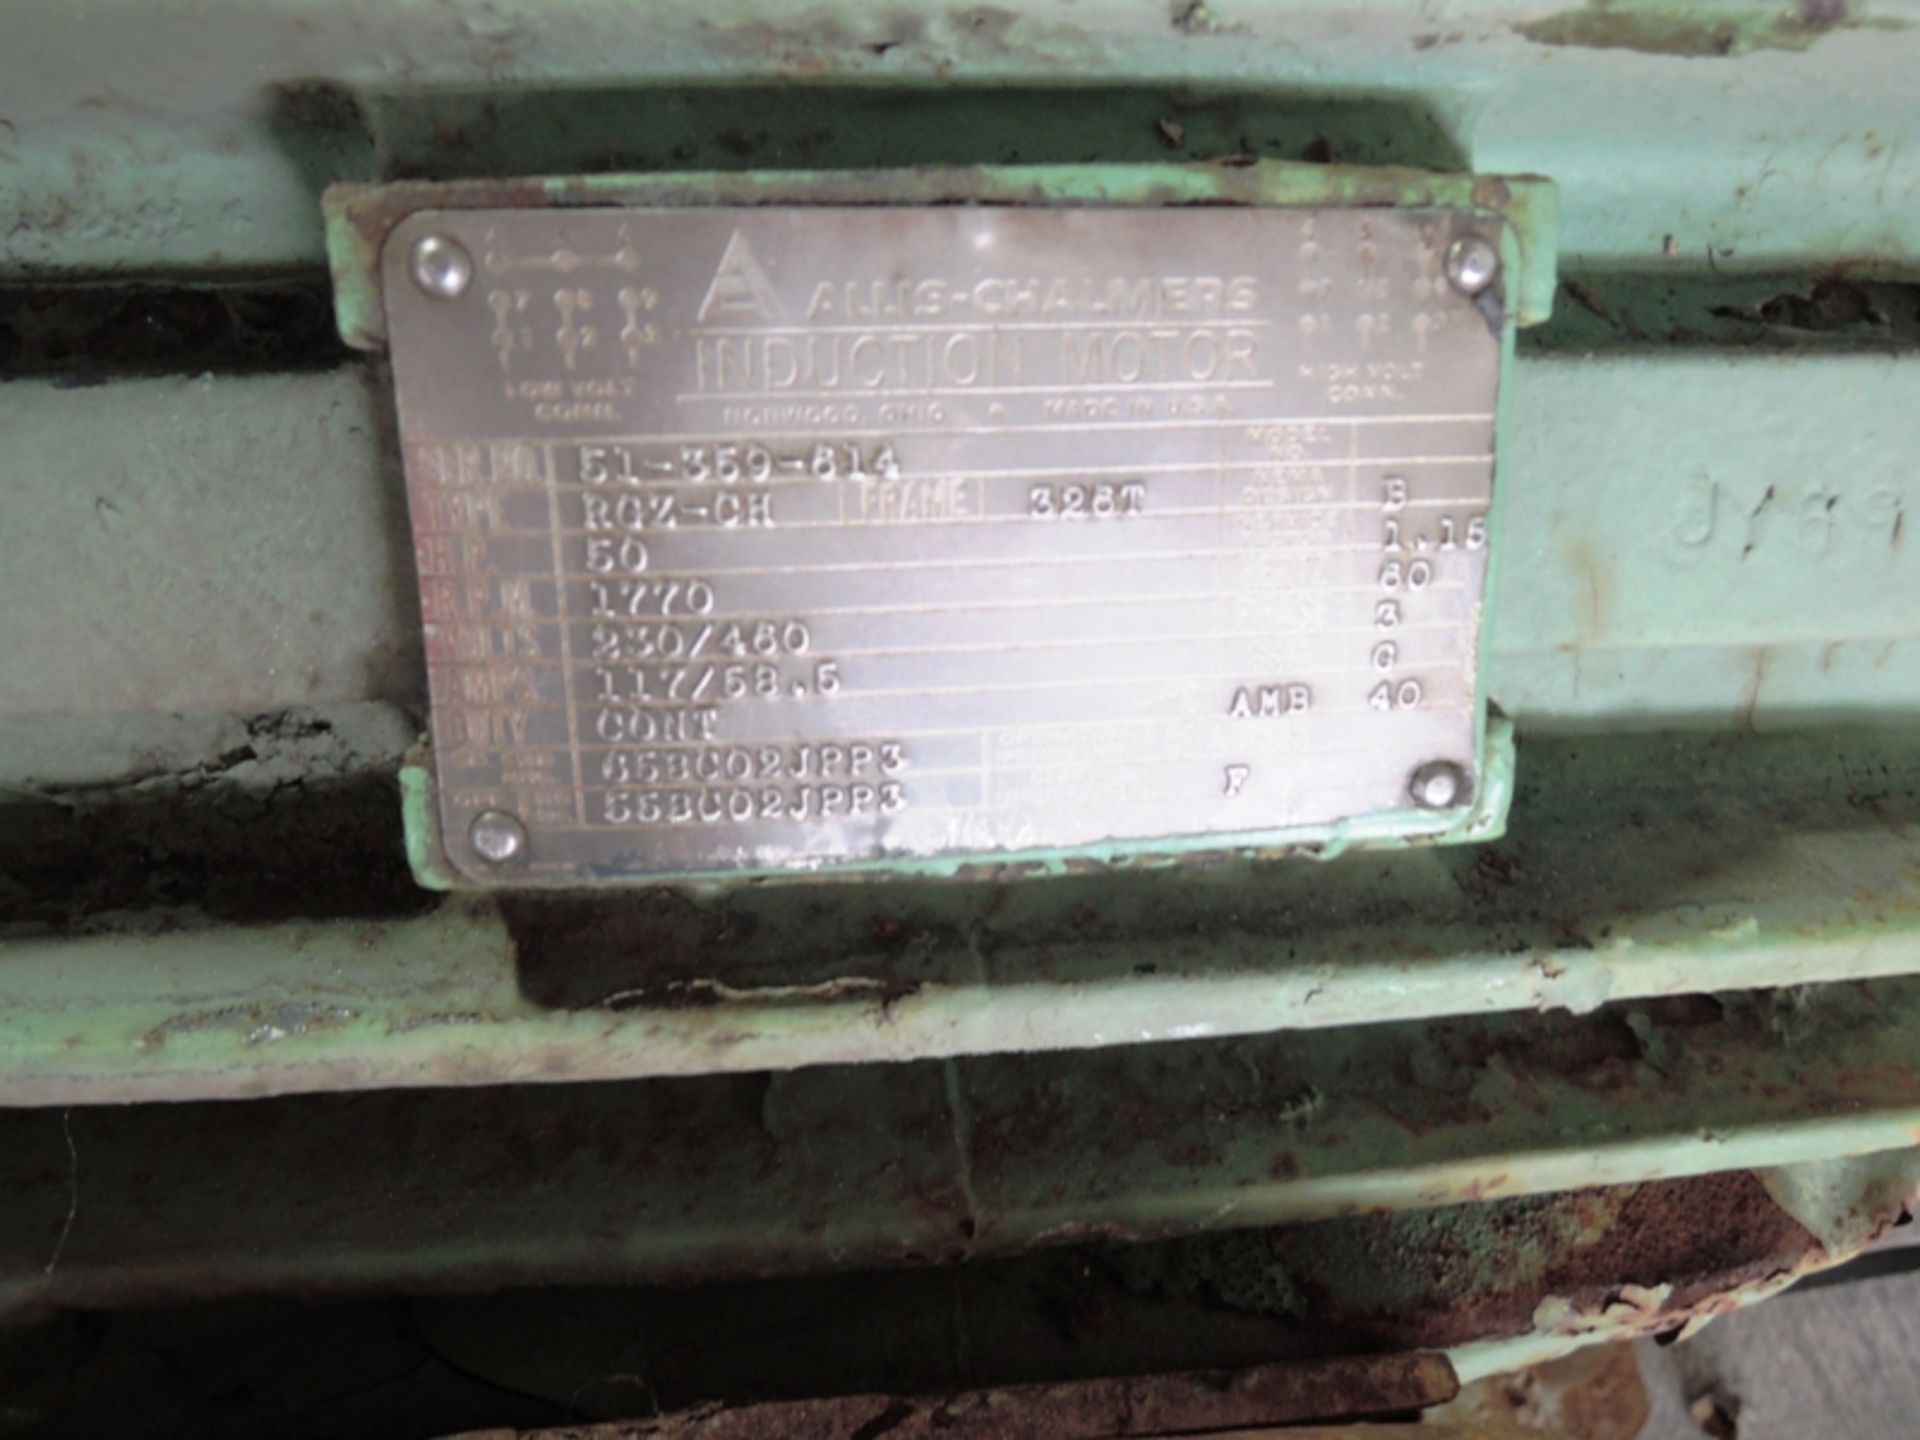 ALLIS CHALMERS 50 HP MOTOR, 1770 RPM, 230/460 VOLTS [WALTON HILLS, OH] - Image 2 of 2